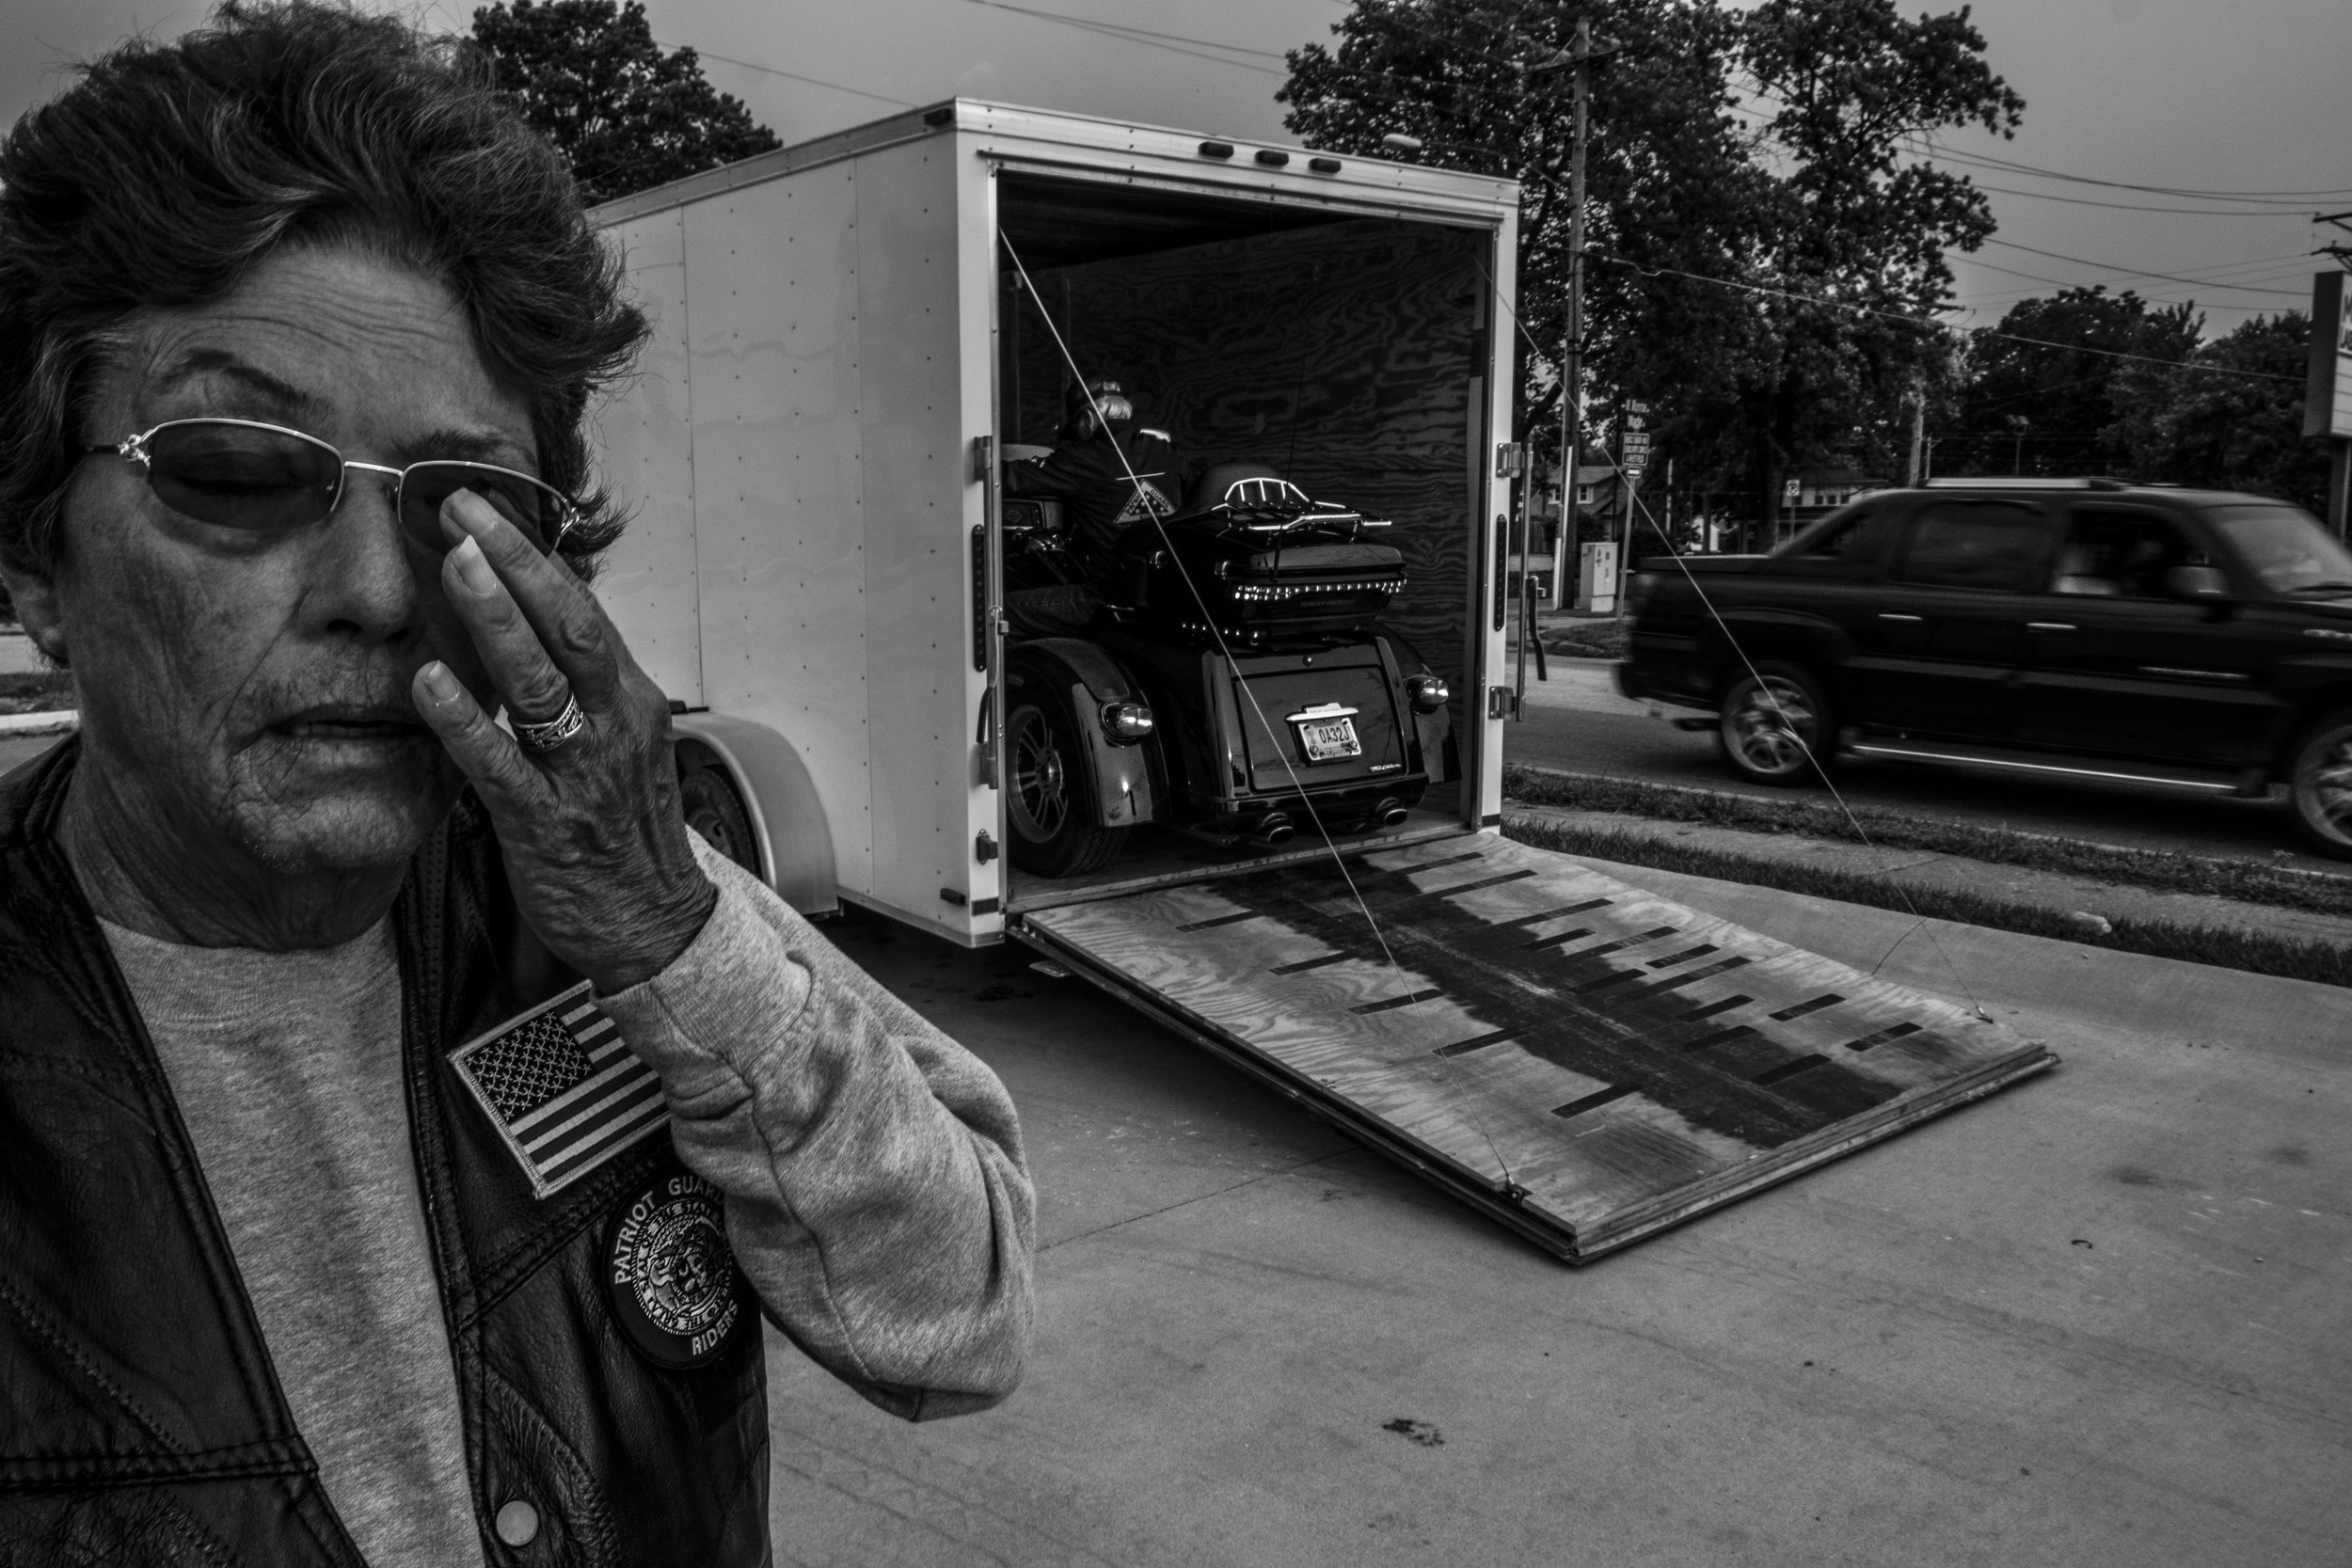  Patriot Guard Rider, Kay Walden, waits for her husband, Bill, to unload their motorcycle for an early morning ride around Mexico, Missouri on Friday, Jun. 21, 2019. 